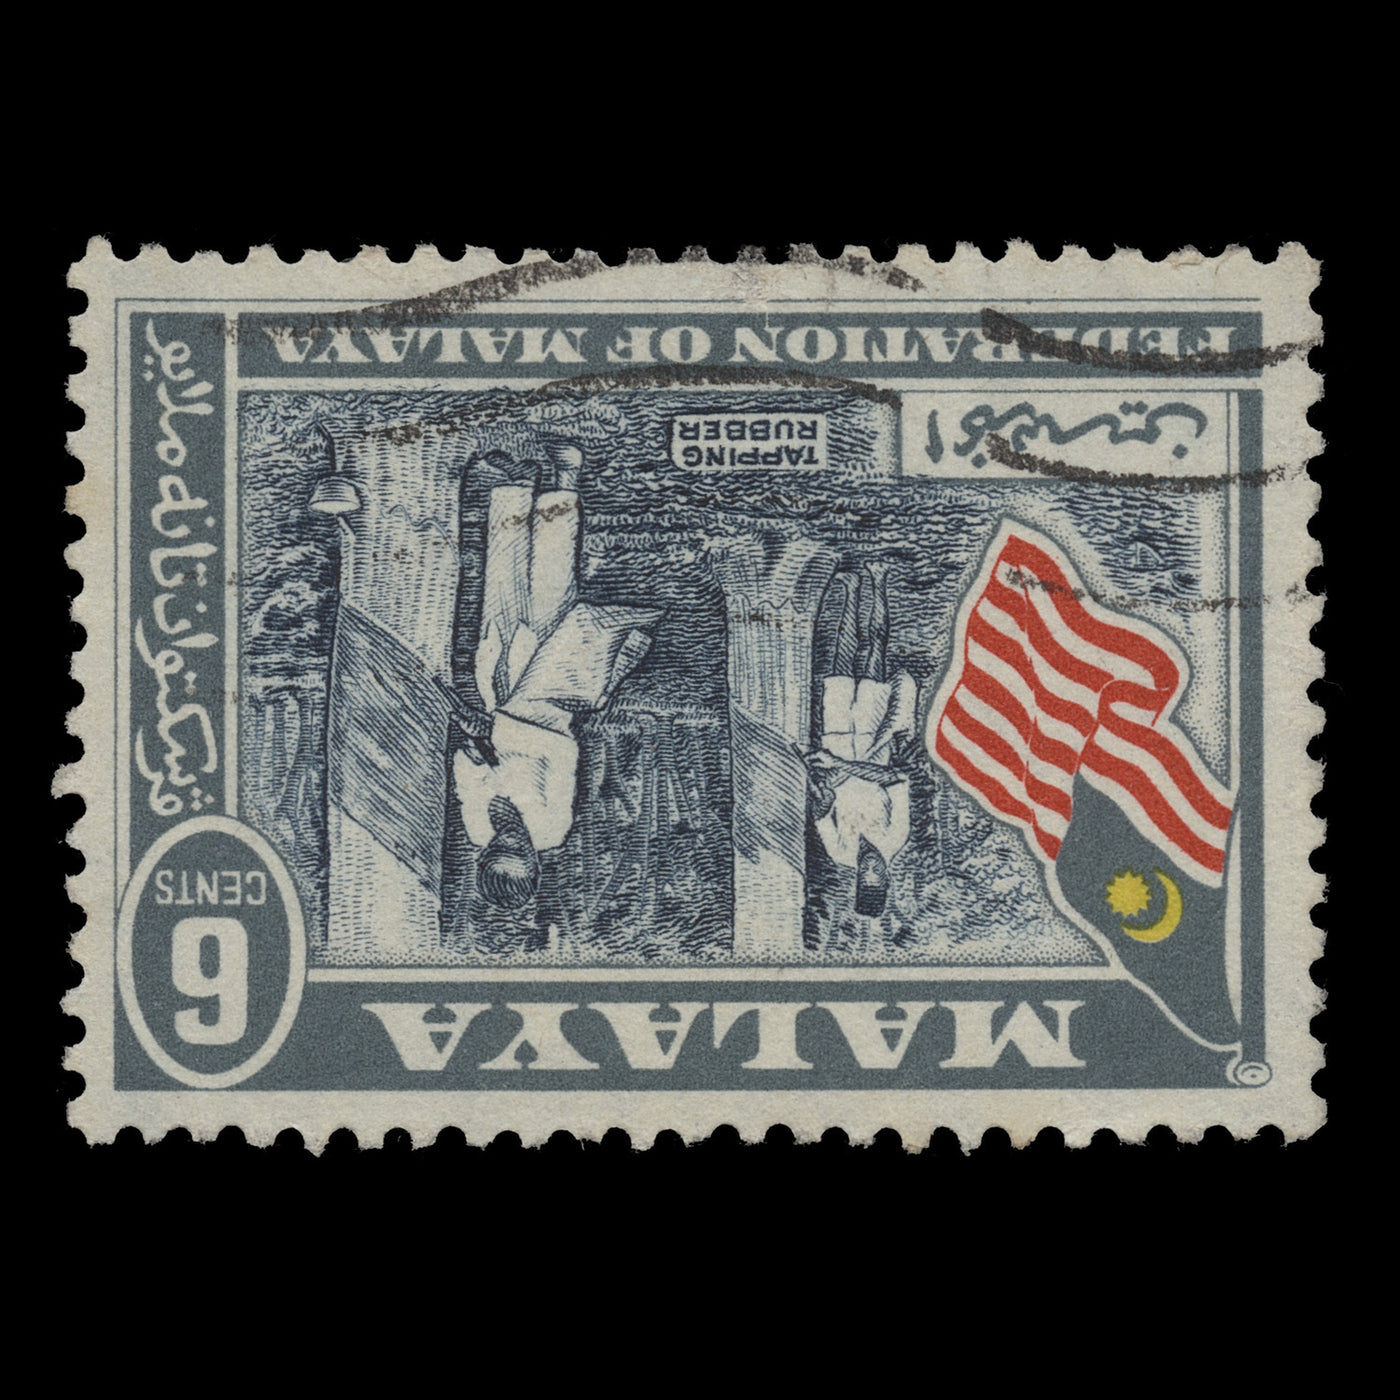 Malaya 1957 6c Tapping Rubber with inverted watermark